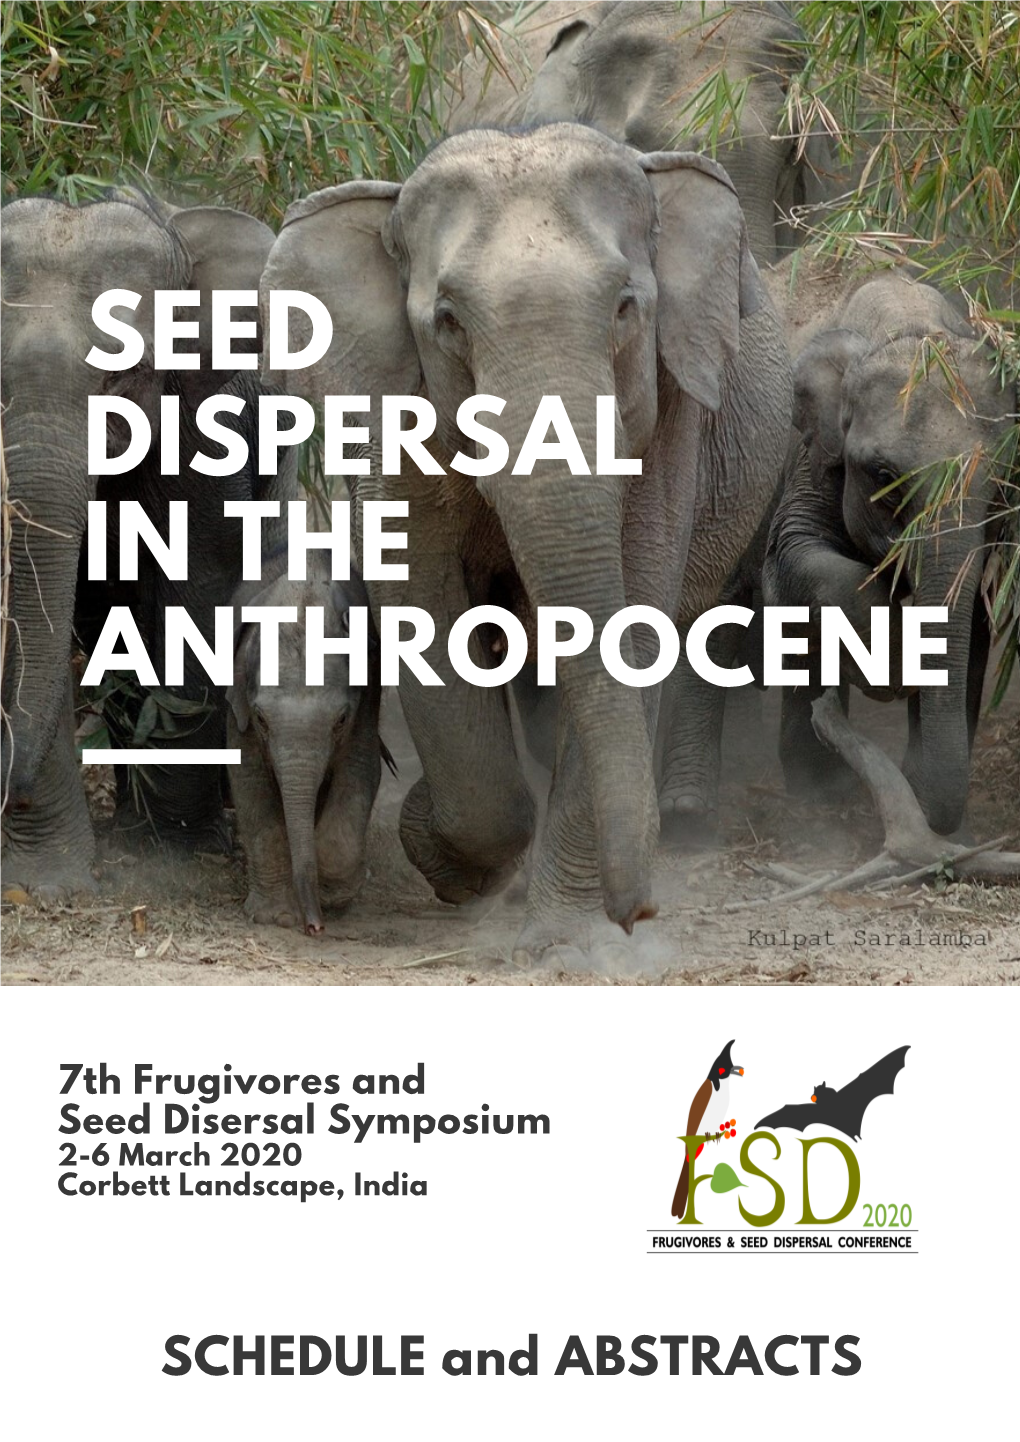 Seed Dispersal in the Anthropocene